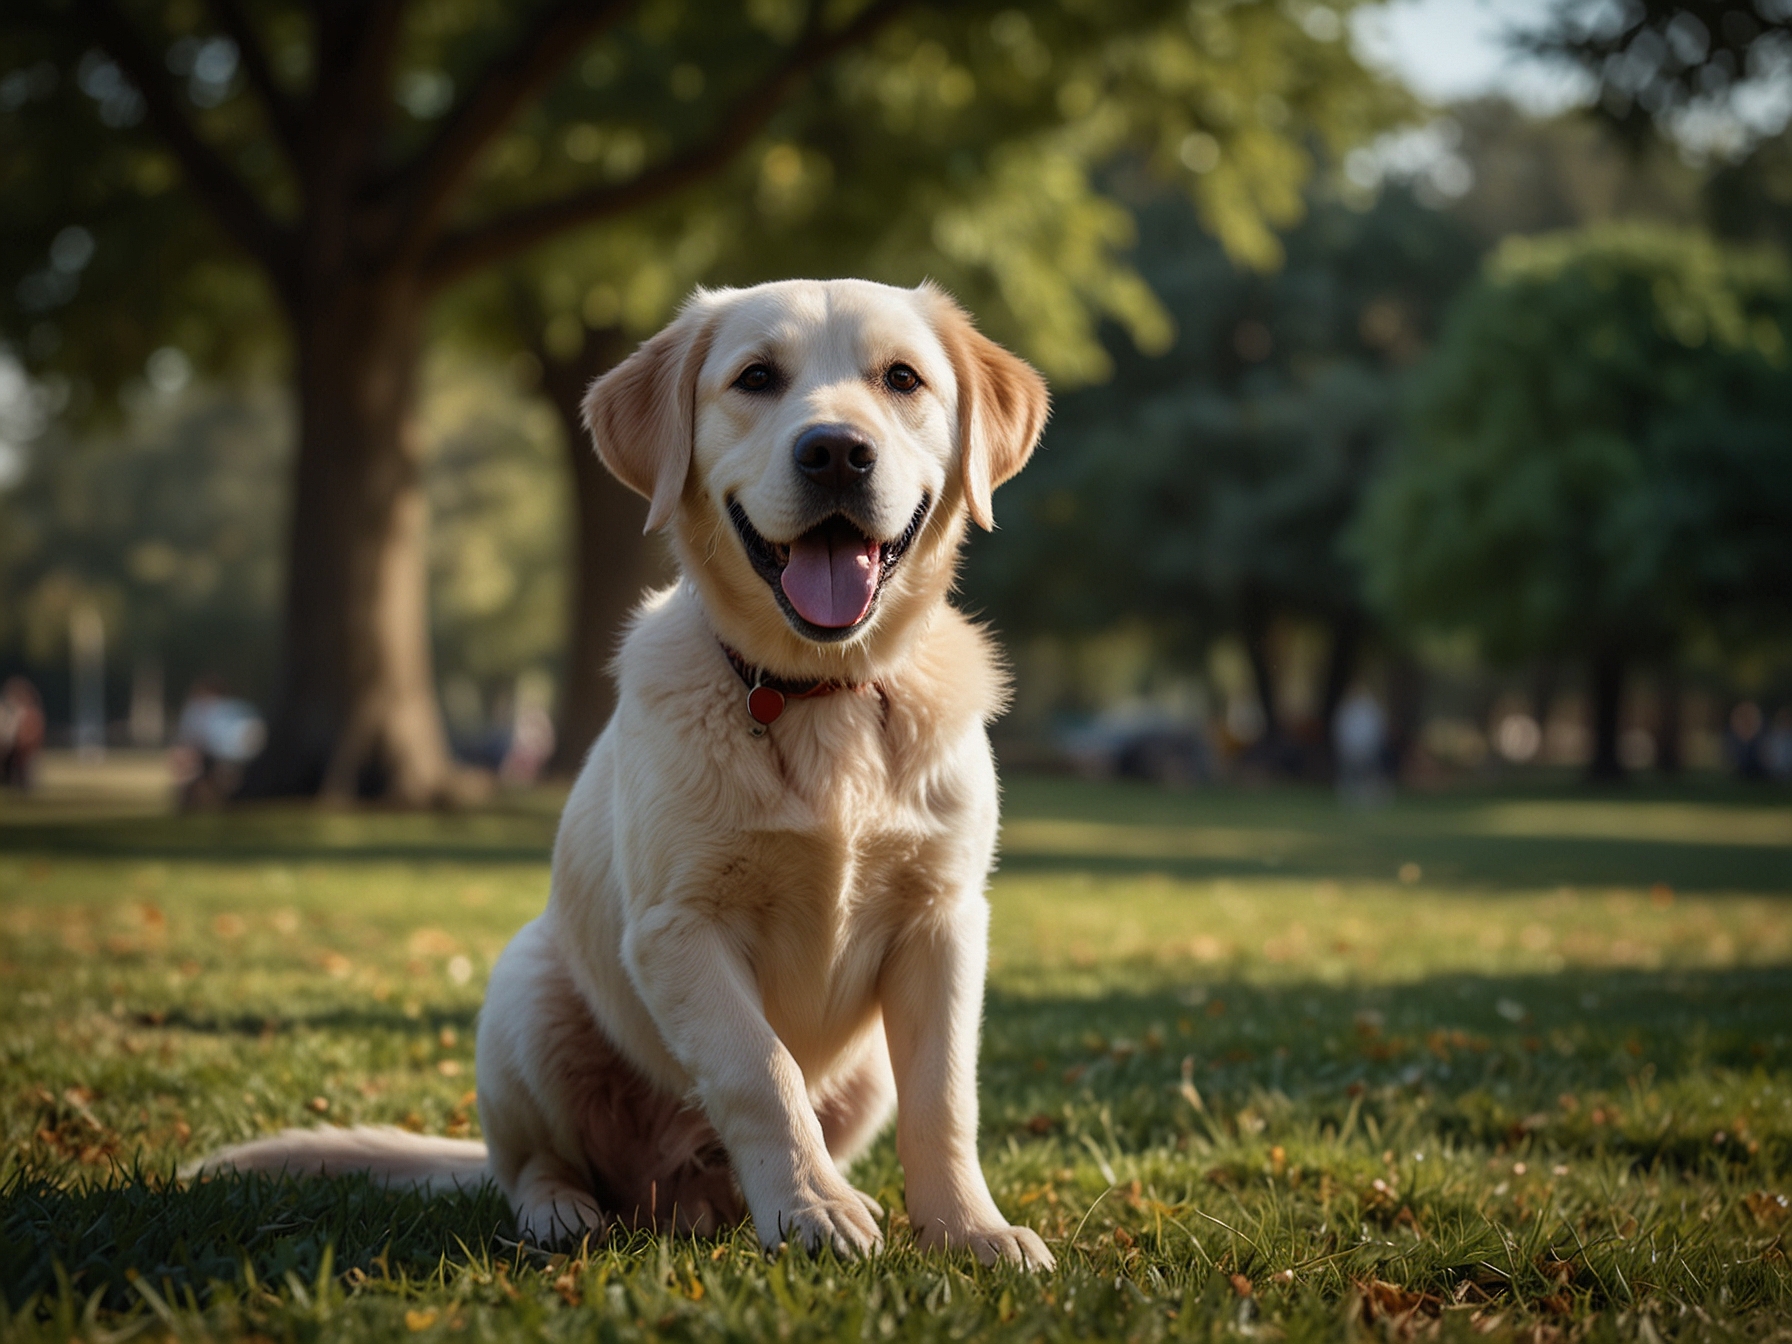 An adorable Labrador Retriever playing in the park, showcasing their friendly and gentle nature, making them a top choice for first-time dog owners due to their ease of training and sociability.